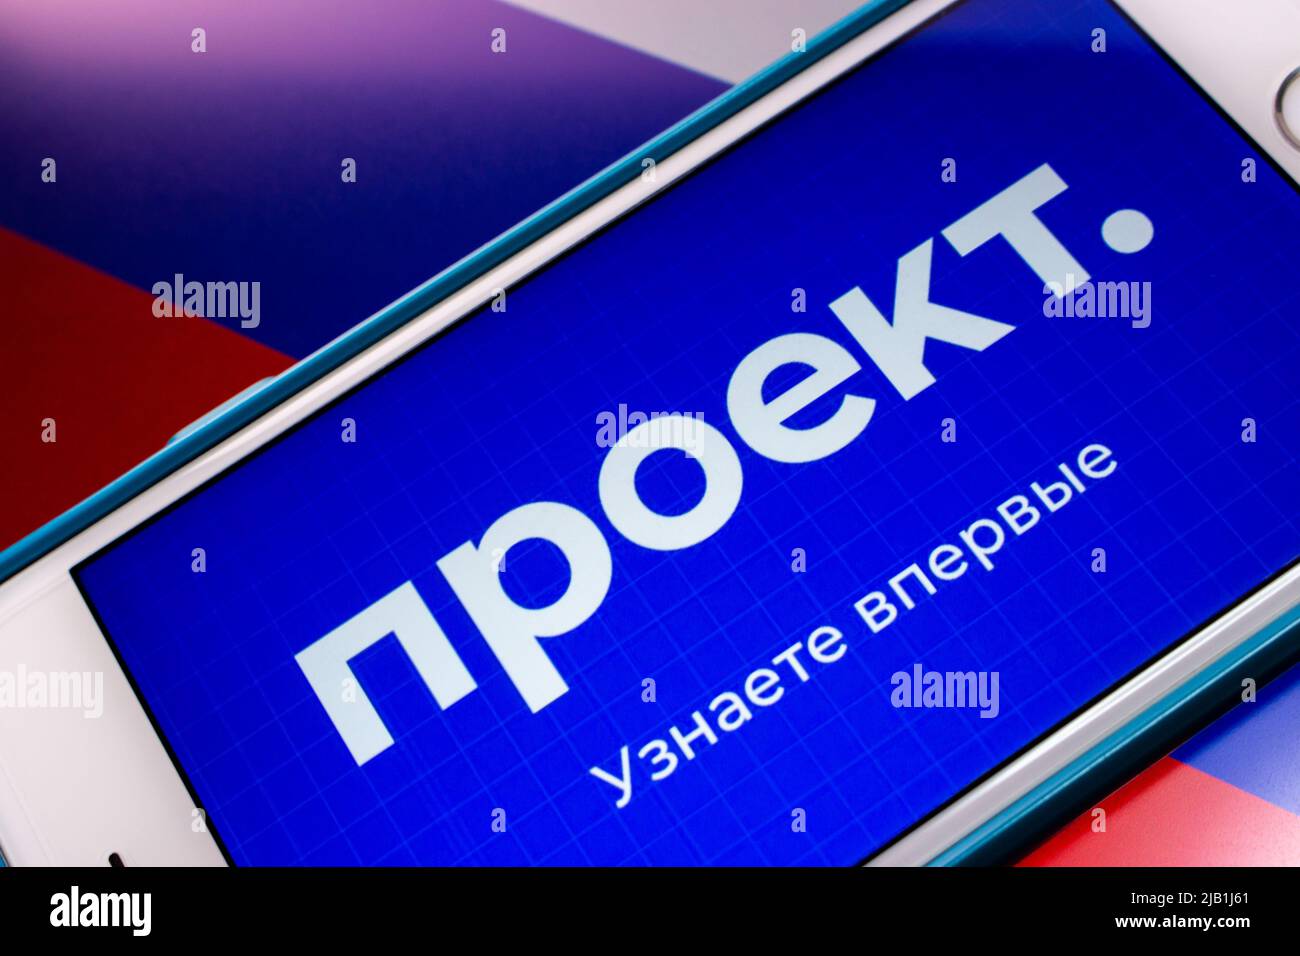 Kumamoto, JAPAN - Jul 19 2021 : Logo of Proekt Media, an Russian media specializing in investigative journalism, on iPhone on Russian Flag Stock Photo